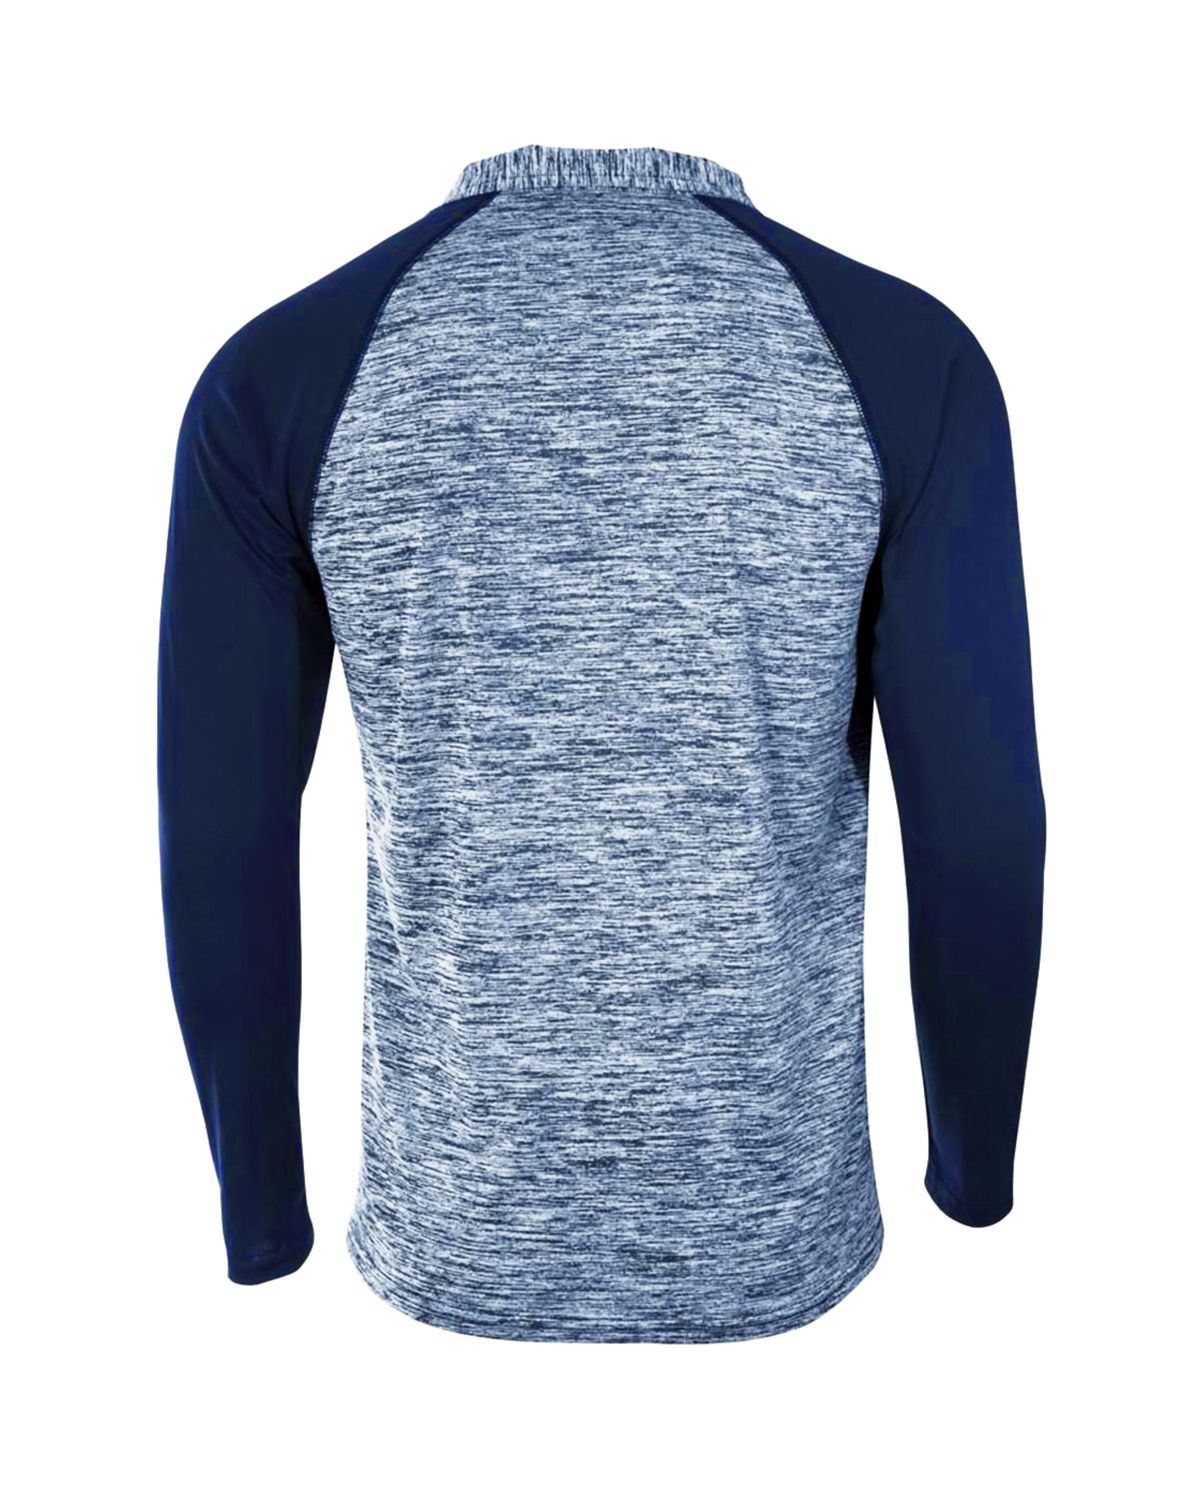 'A4 N4249 Adult Space-Dye 1/4 Zip with Contrast Sleeve'